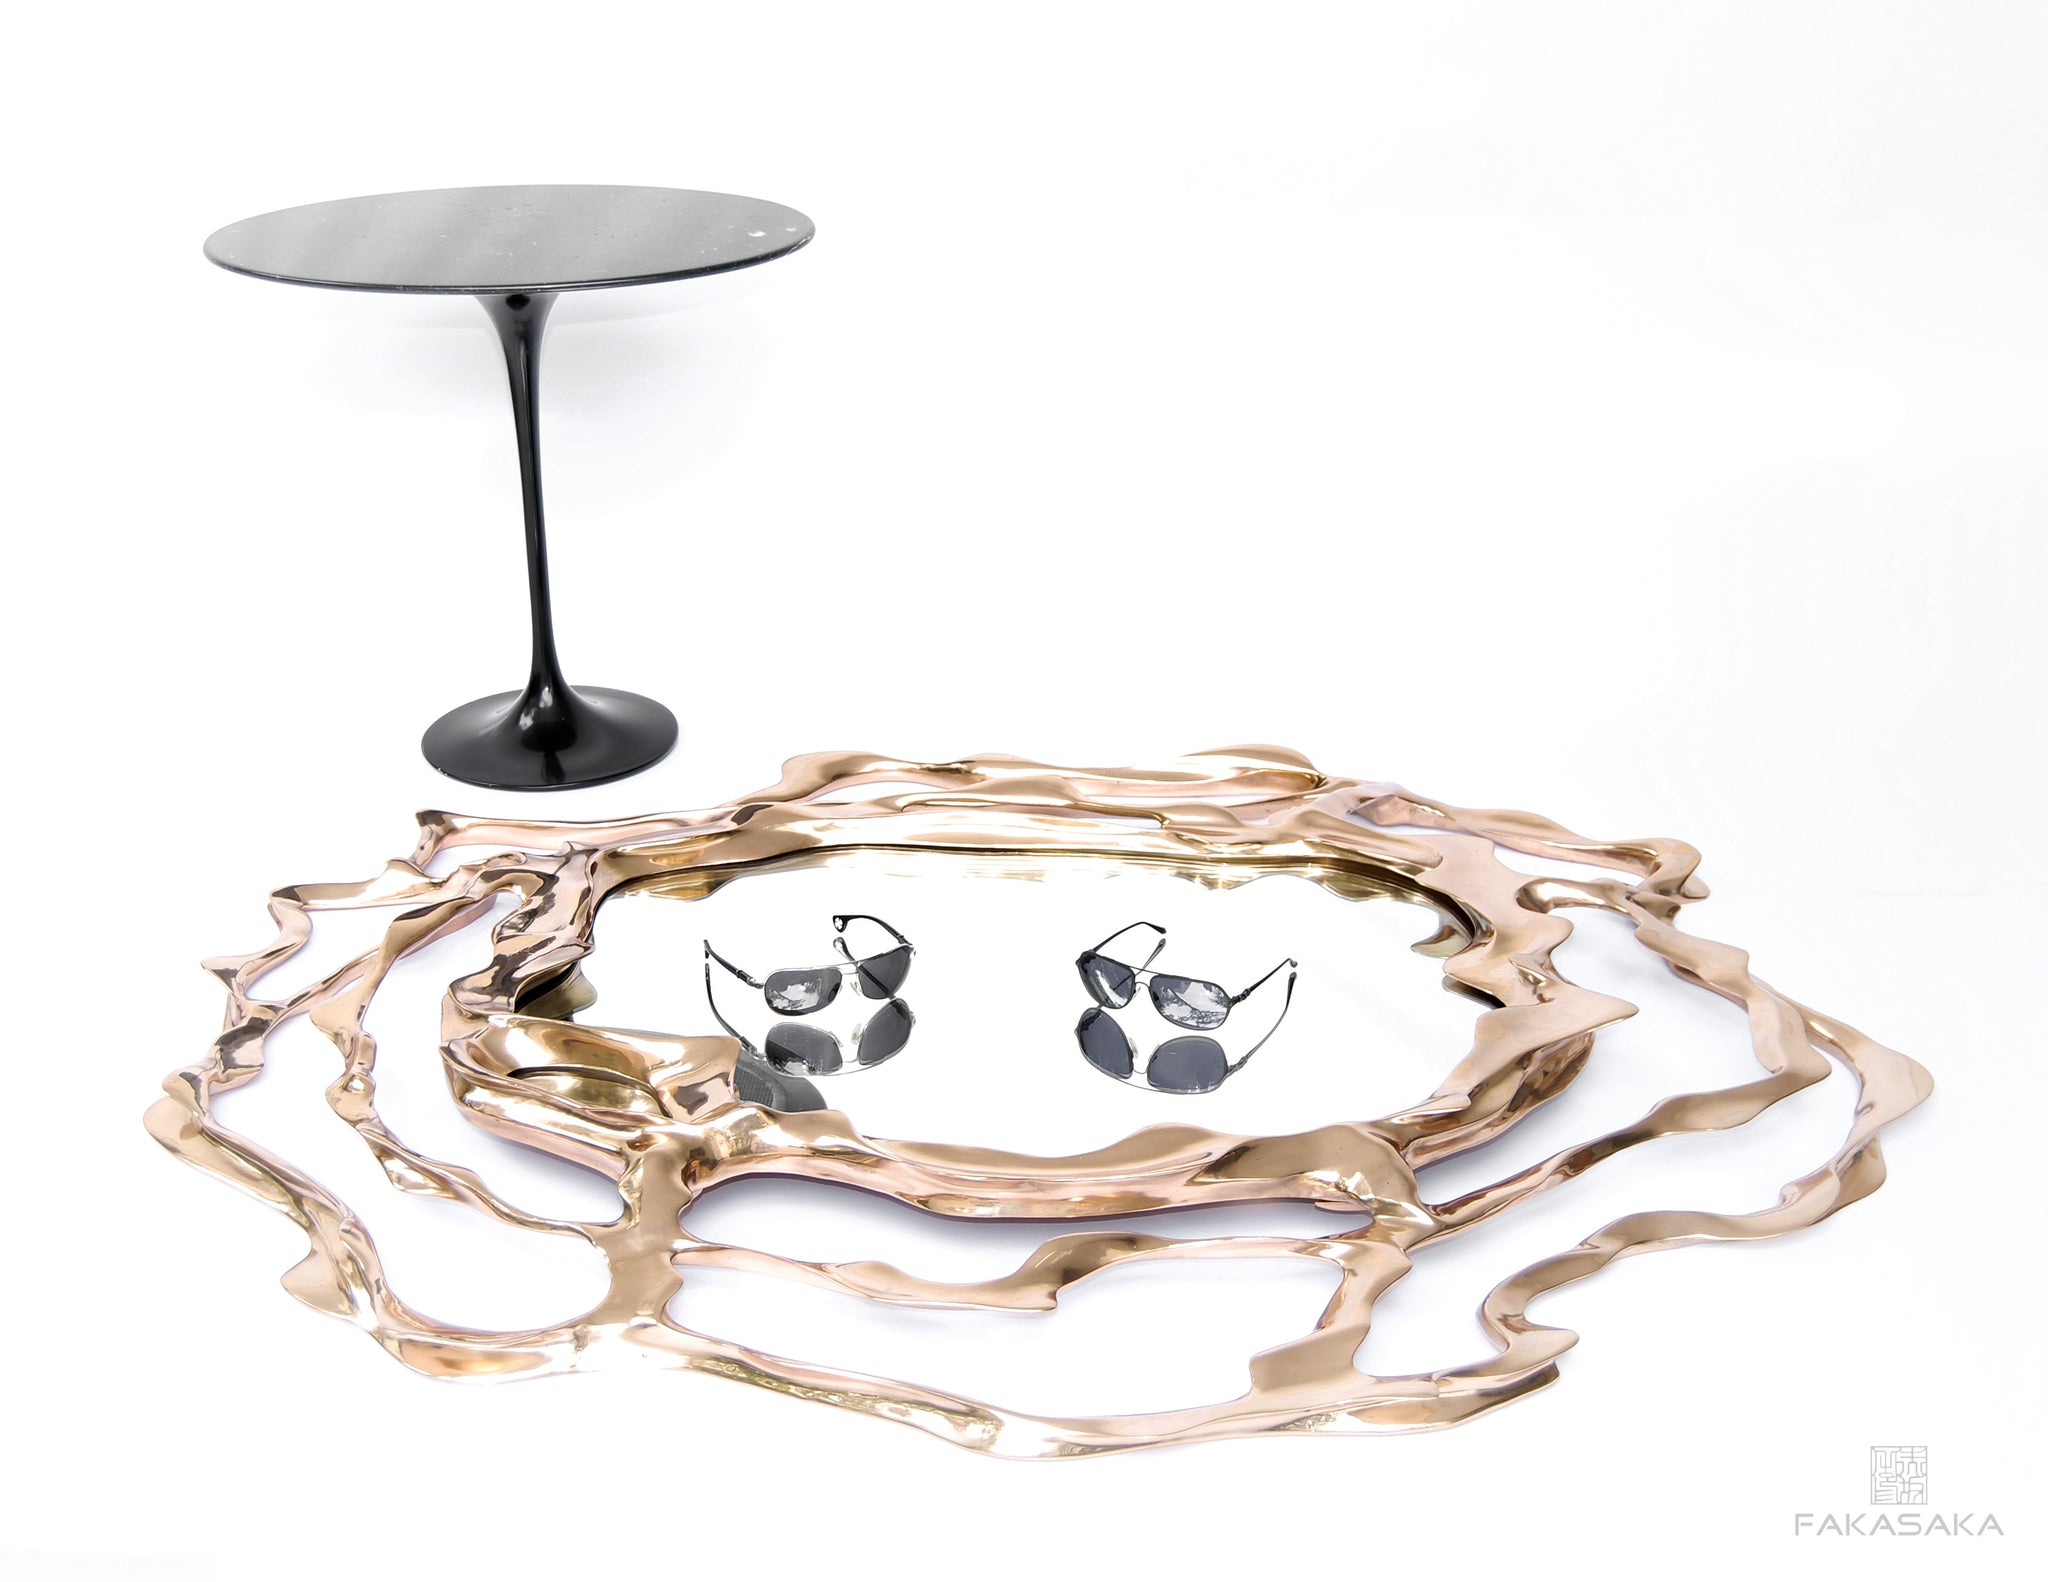 ALEXIA<br><br>LARGE SIZE MIRROR<br><br>POLISHED BRONZE<br>SILVER MIRROR